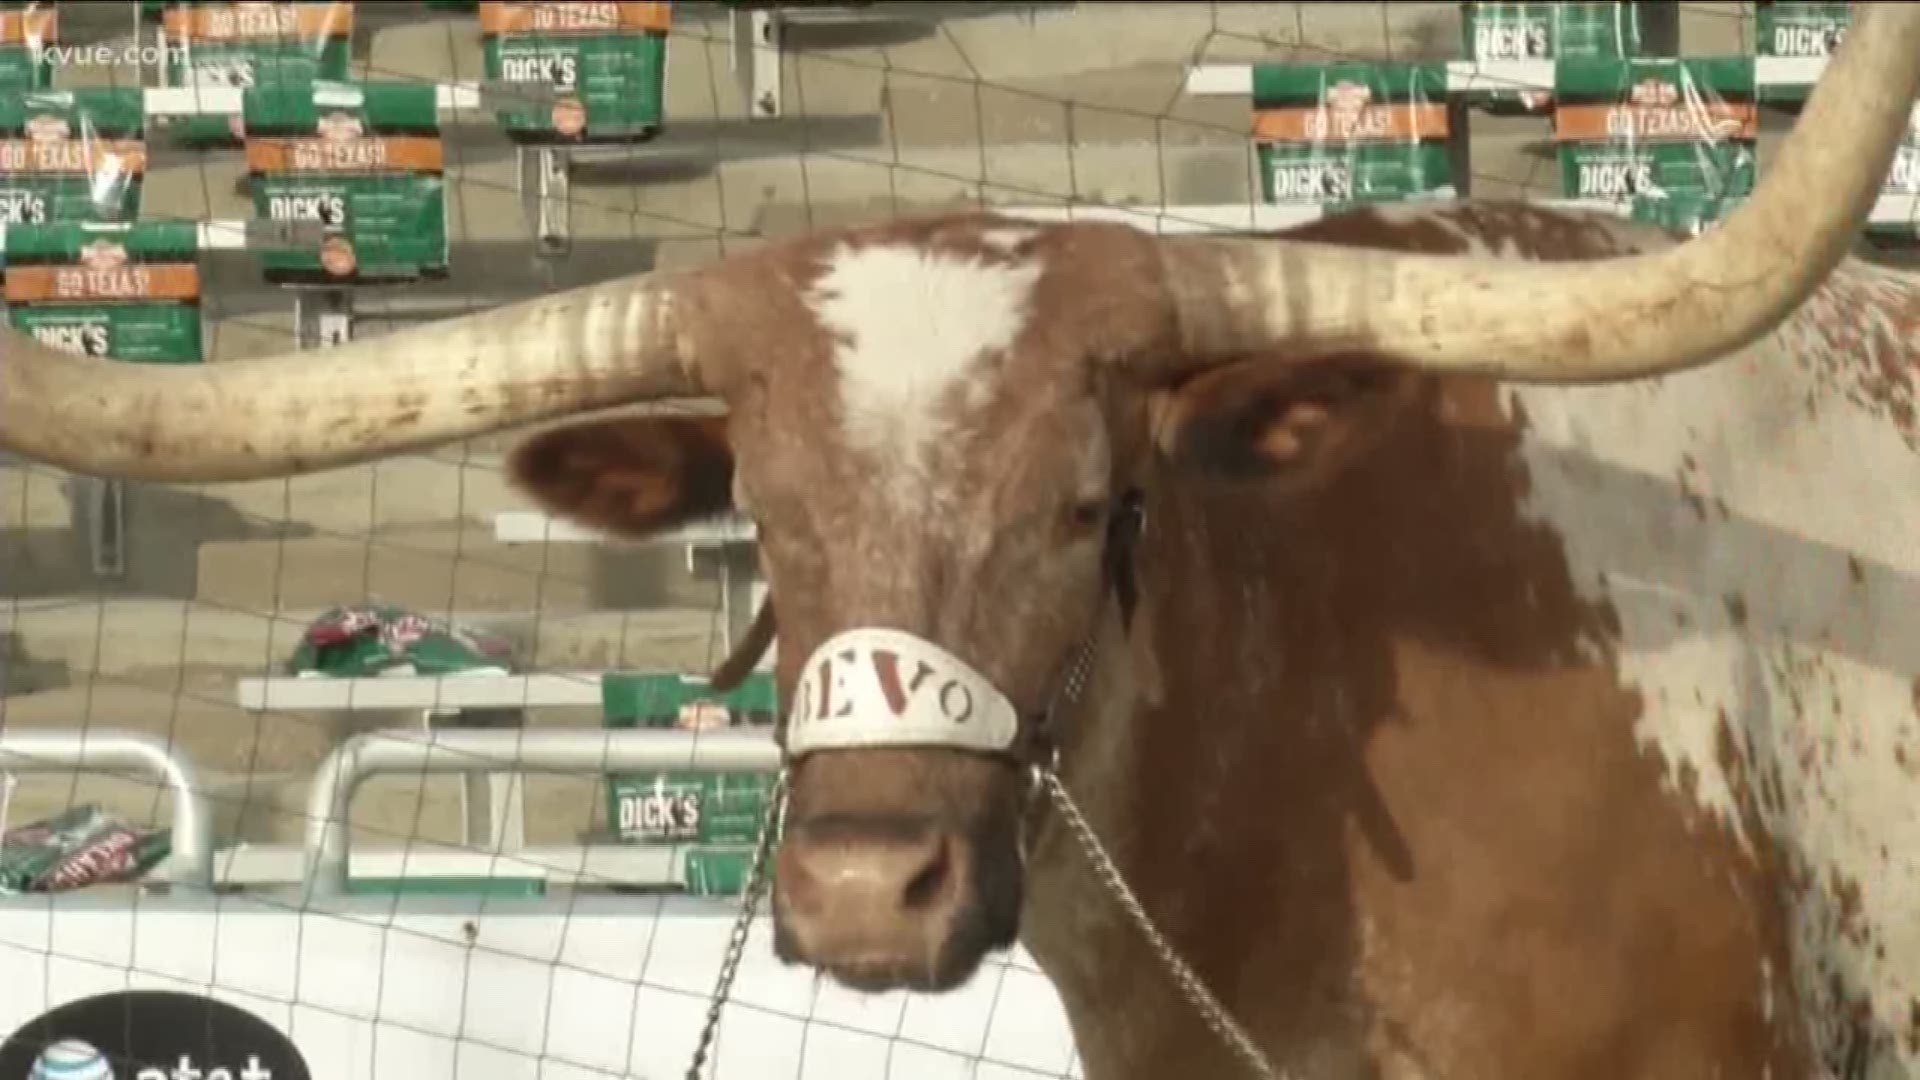 UT fans are used to seeing Bevo on the scoreboard at every home game, but tonight, the story is about how the real Bevo XIV's death may actually help humans.